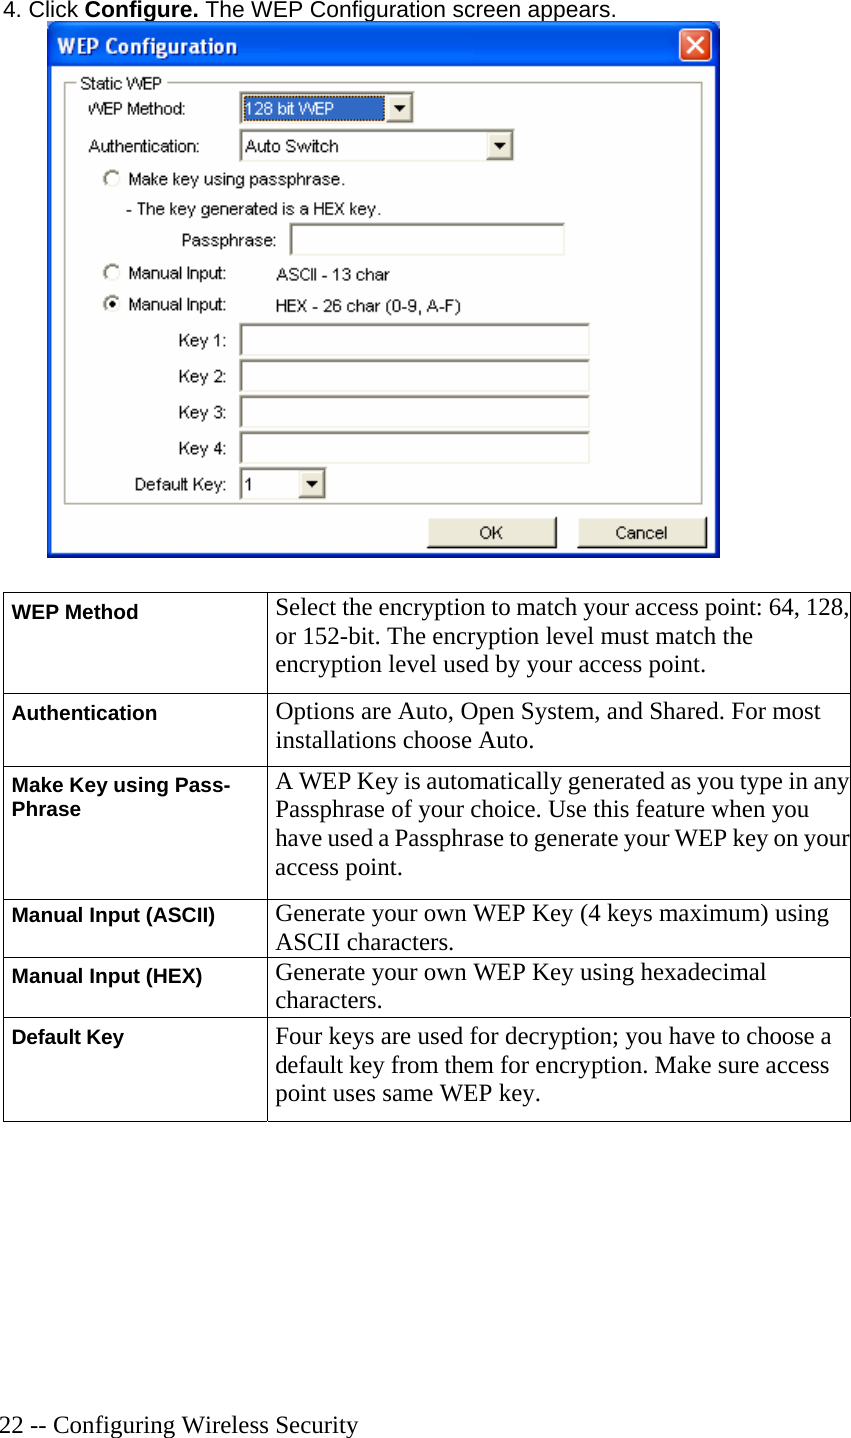   22 -- Configuring Wireless Security 4. Click Configure. The WEP Configuration screen appears.  WEP Method Select the encryption to match your access point: 64, 128, or 152-bit. The encryption level must match the encryption level used by your access point. Authentication Options are Auto, Open System, and Shared. For most installations choose Auto.  Make Key using Pass- Phrase A WEP Key is automatically generated as you type in any Passphrase of your choice. Use this feature when you have used a Passphrase to generate your WEP key on your access point. Manual Input (ASCII) Generate your own WEP Key (4 keys maximum) using ASCII characters. Manual Input (HEX) Generate your own WEP Key using hexadecimal characters. Default Key Four keys are used for decryption; you have to choose a default key from them for encryption. Make sure access point uses same WEP key.  